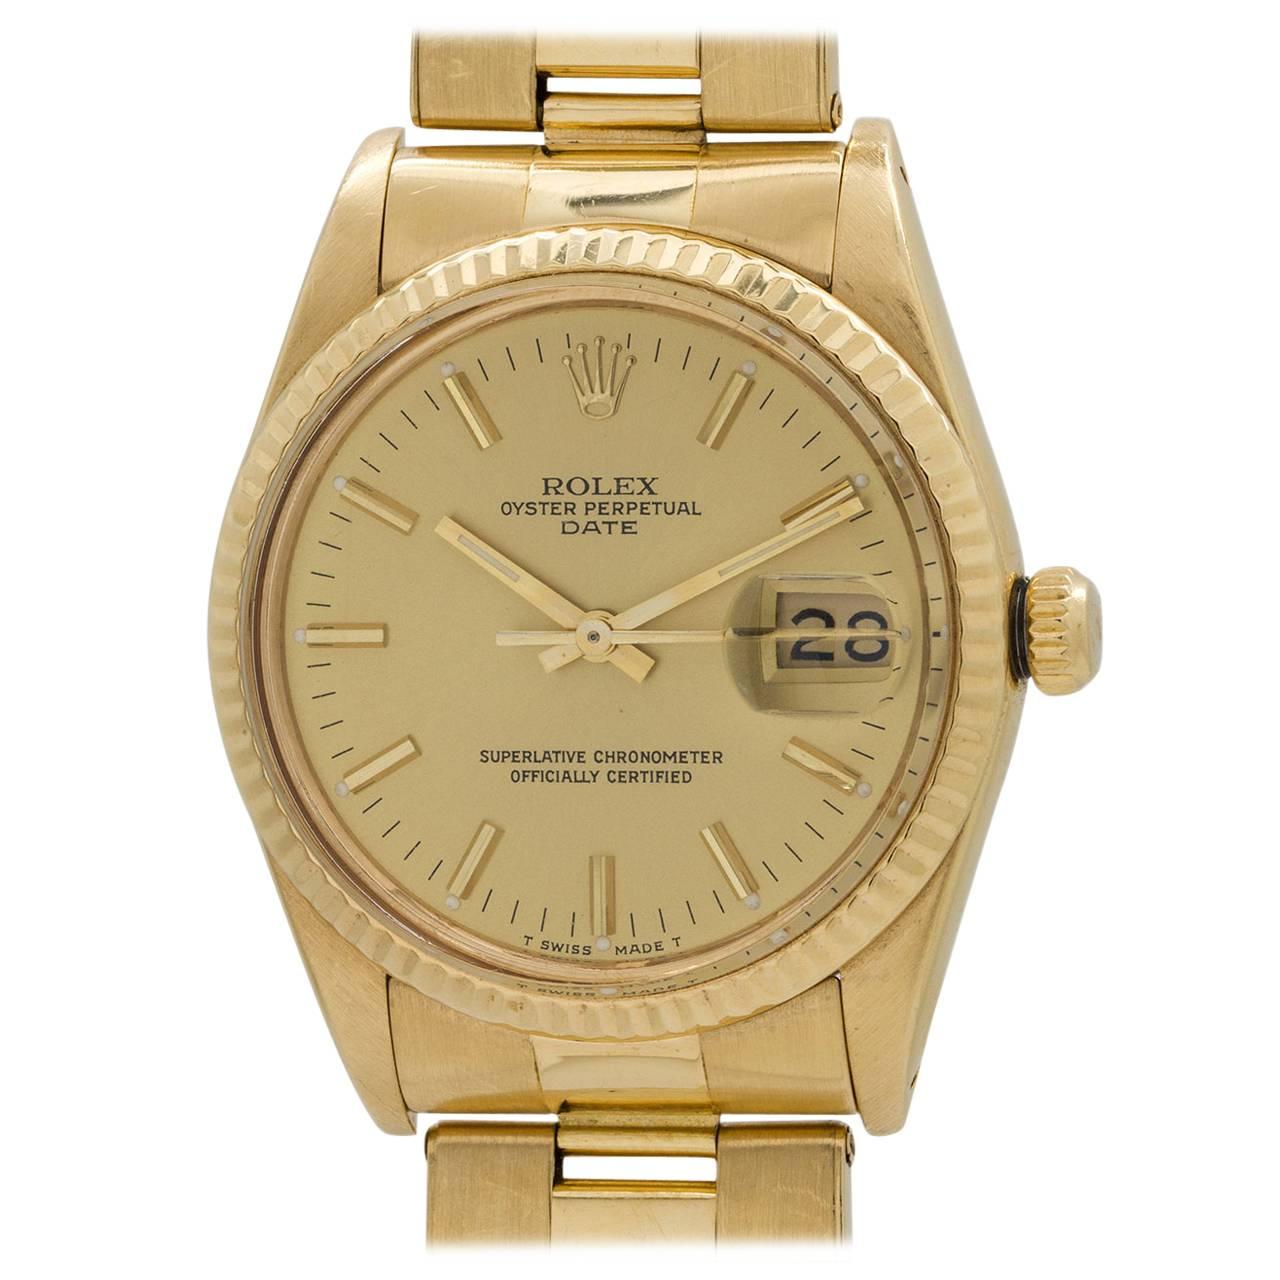 Rolex Yellow Gold Oyster Perpetual Date Wristwatch Ref 1500 circa 1985